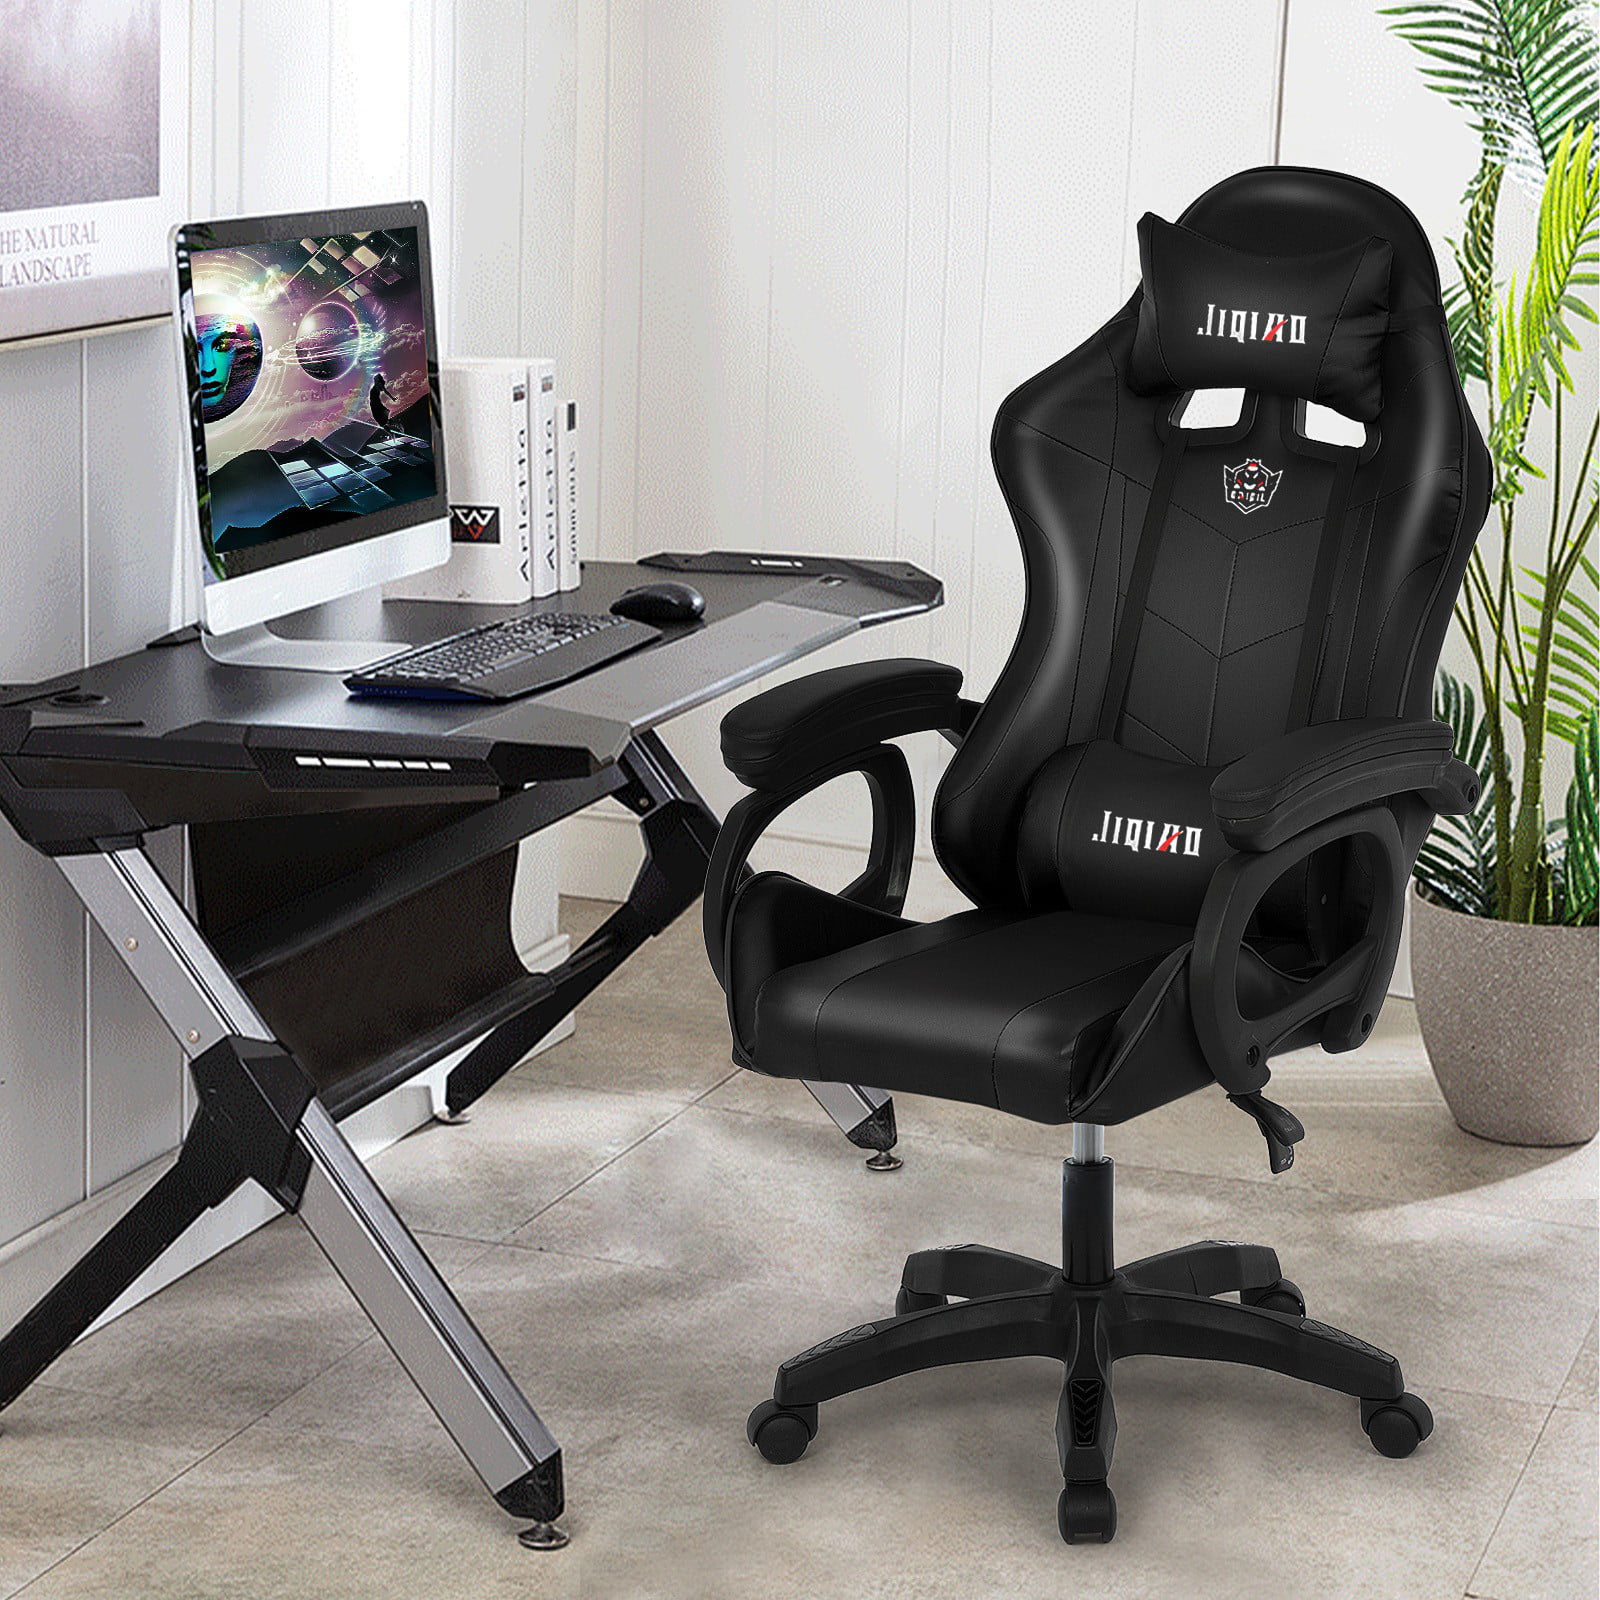 Details about   Office Racing Gaming Chair Home Computer Desk Adjustable Armrest Fabric Study US 